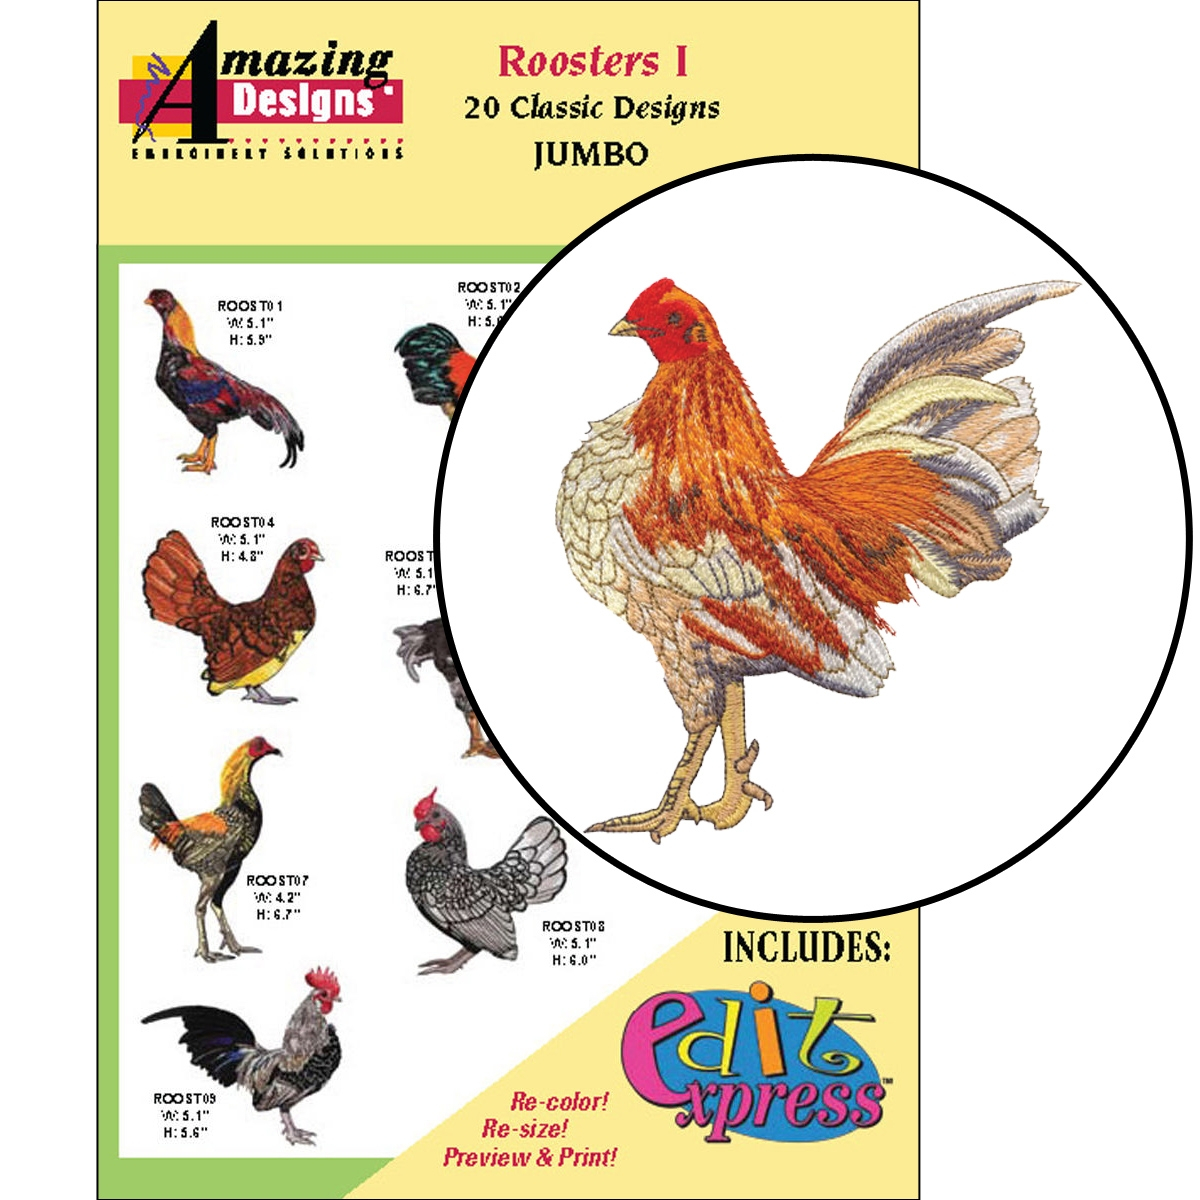 Chicken Embroidery Patterns Roosters I Embroidery Designs